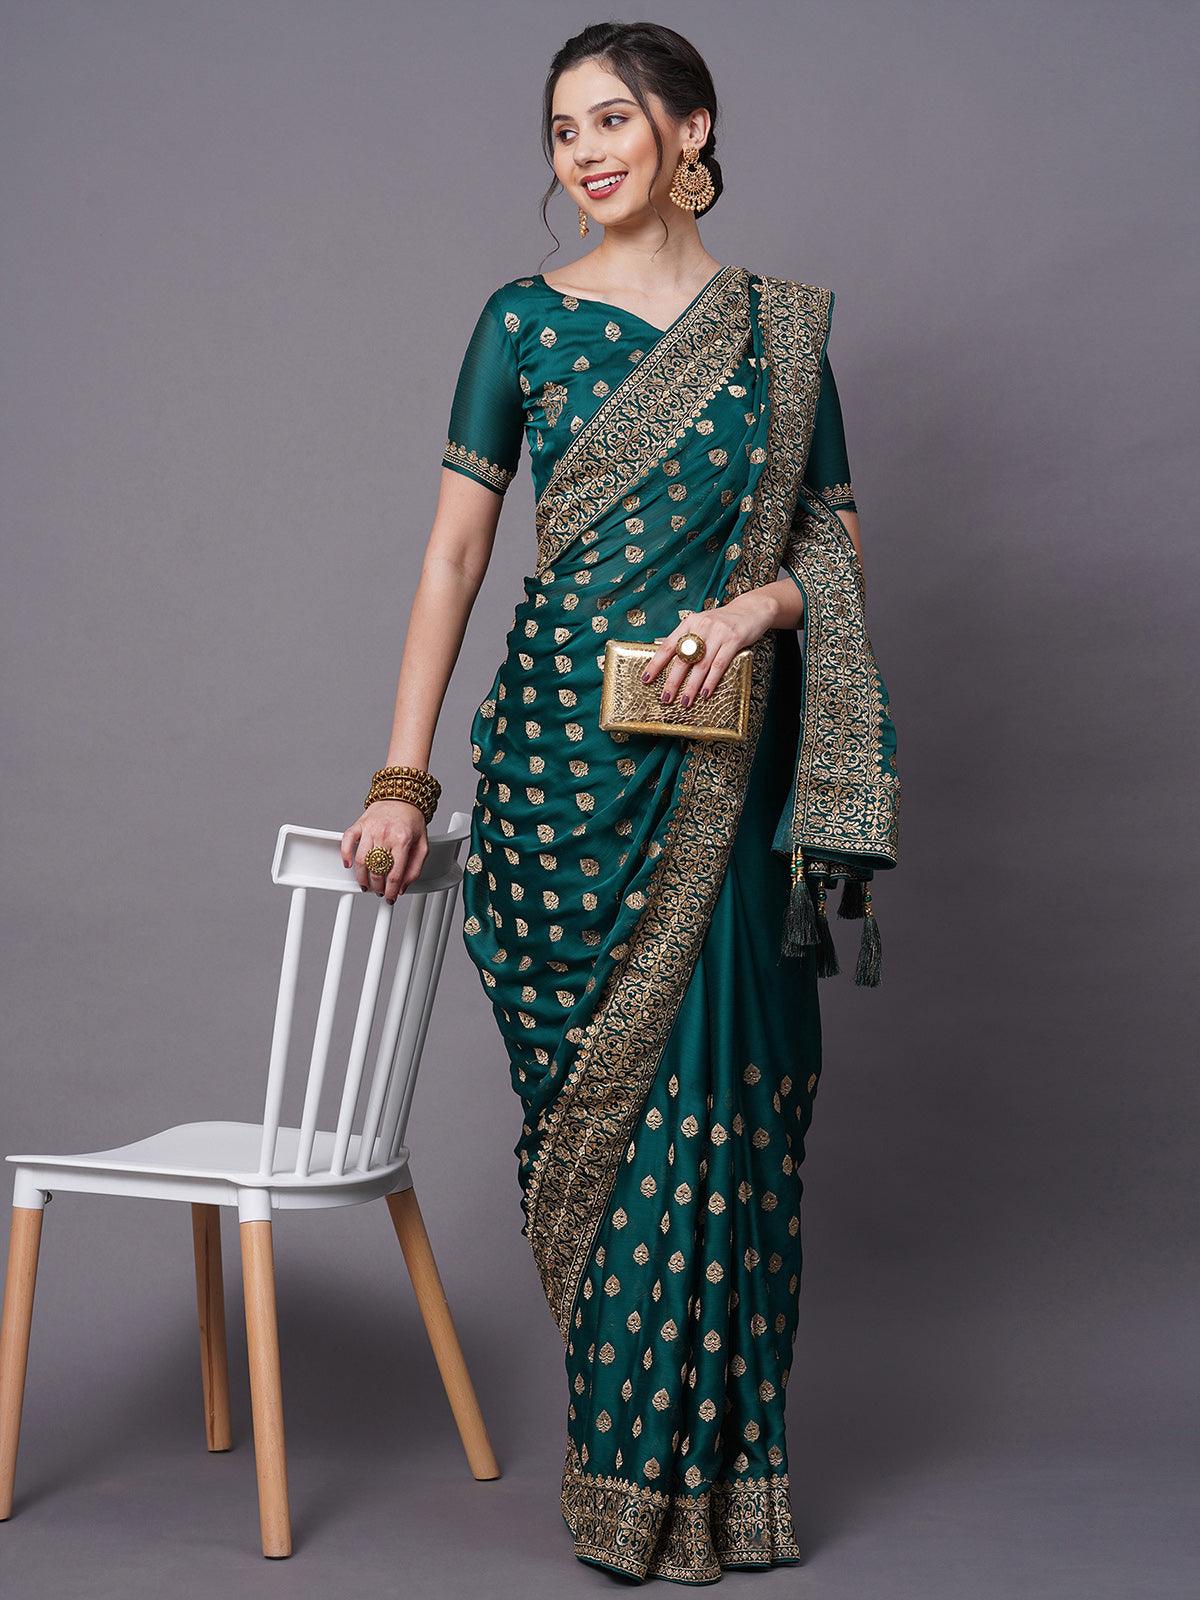 Women's Teal Blue Party Wear Satin Chiffon Embelished Saree With Unstitched Blouse - Odette